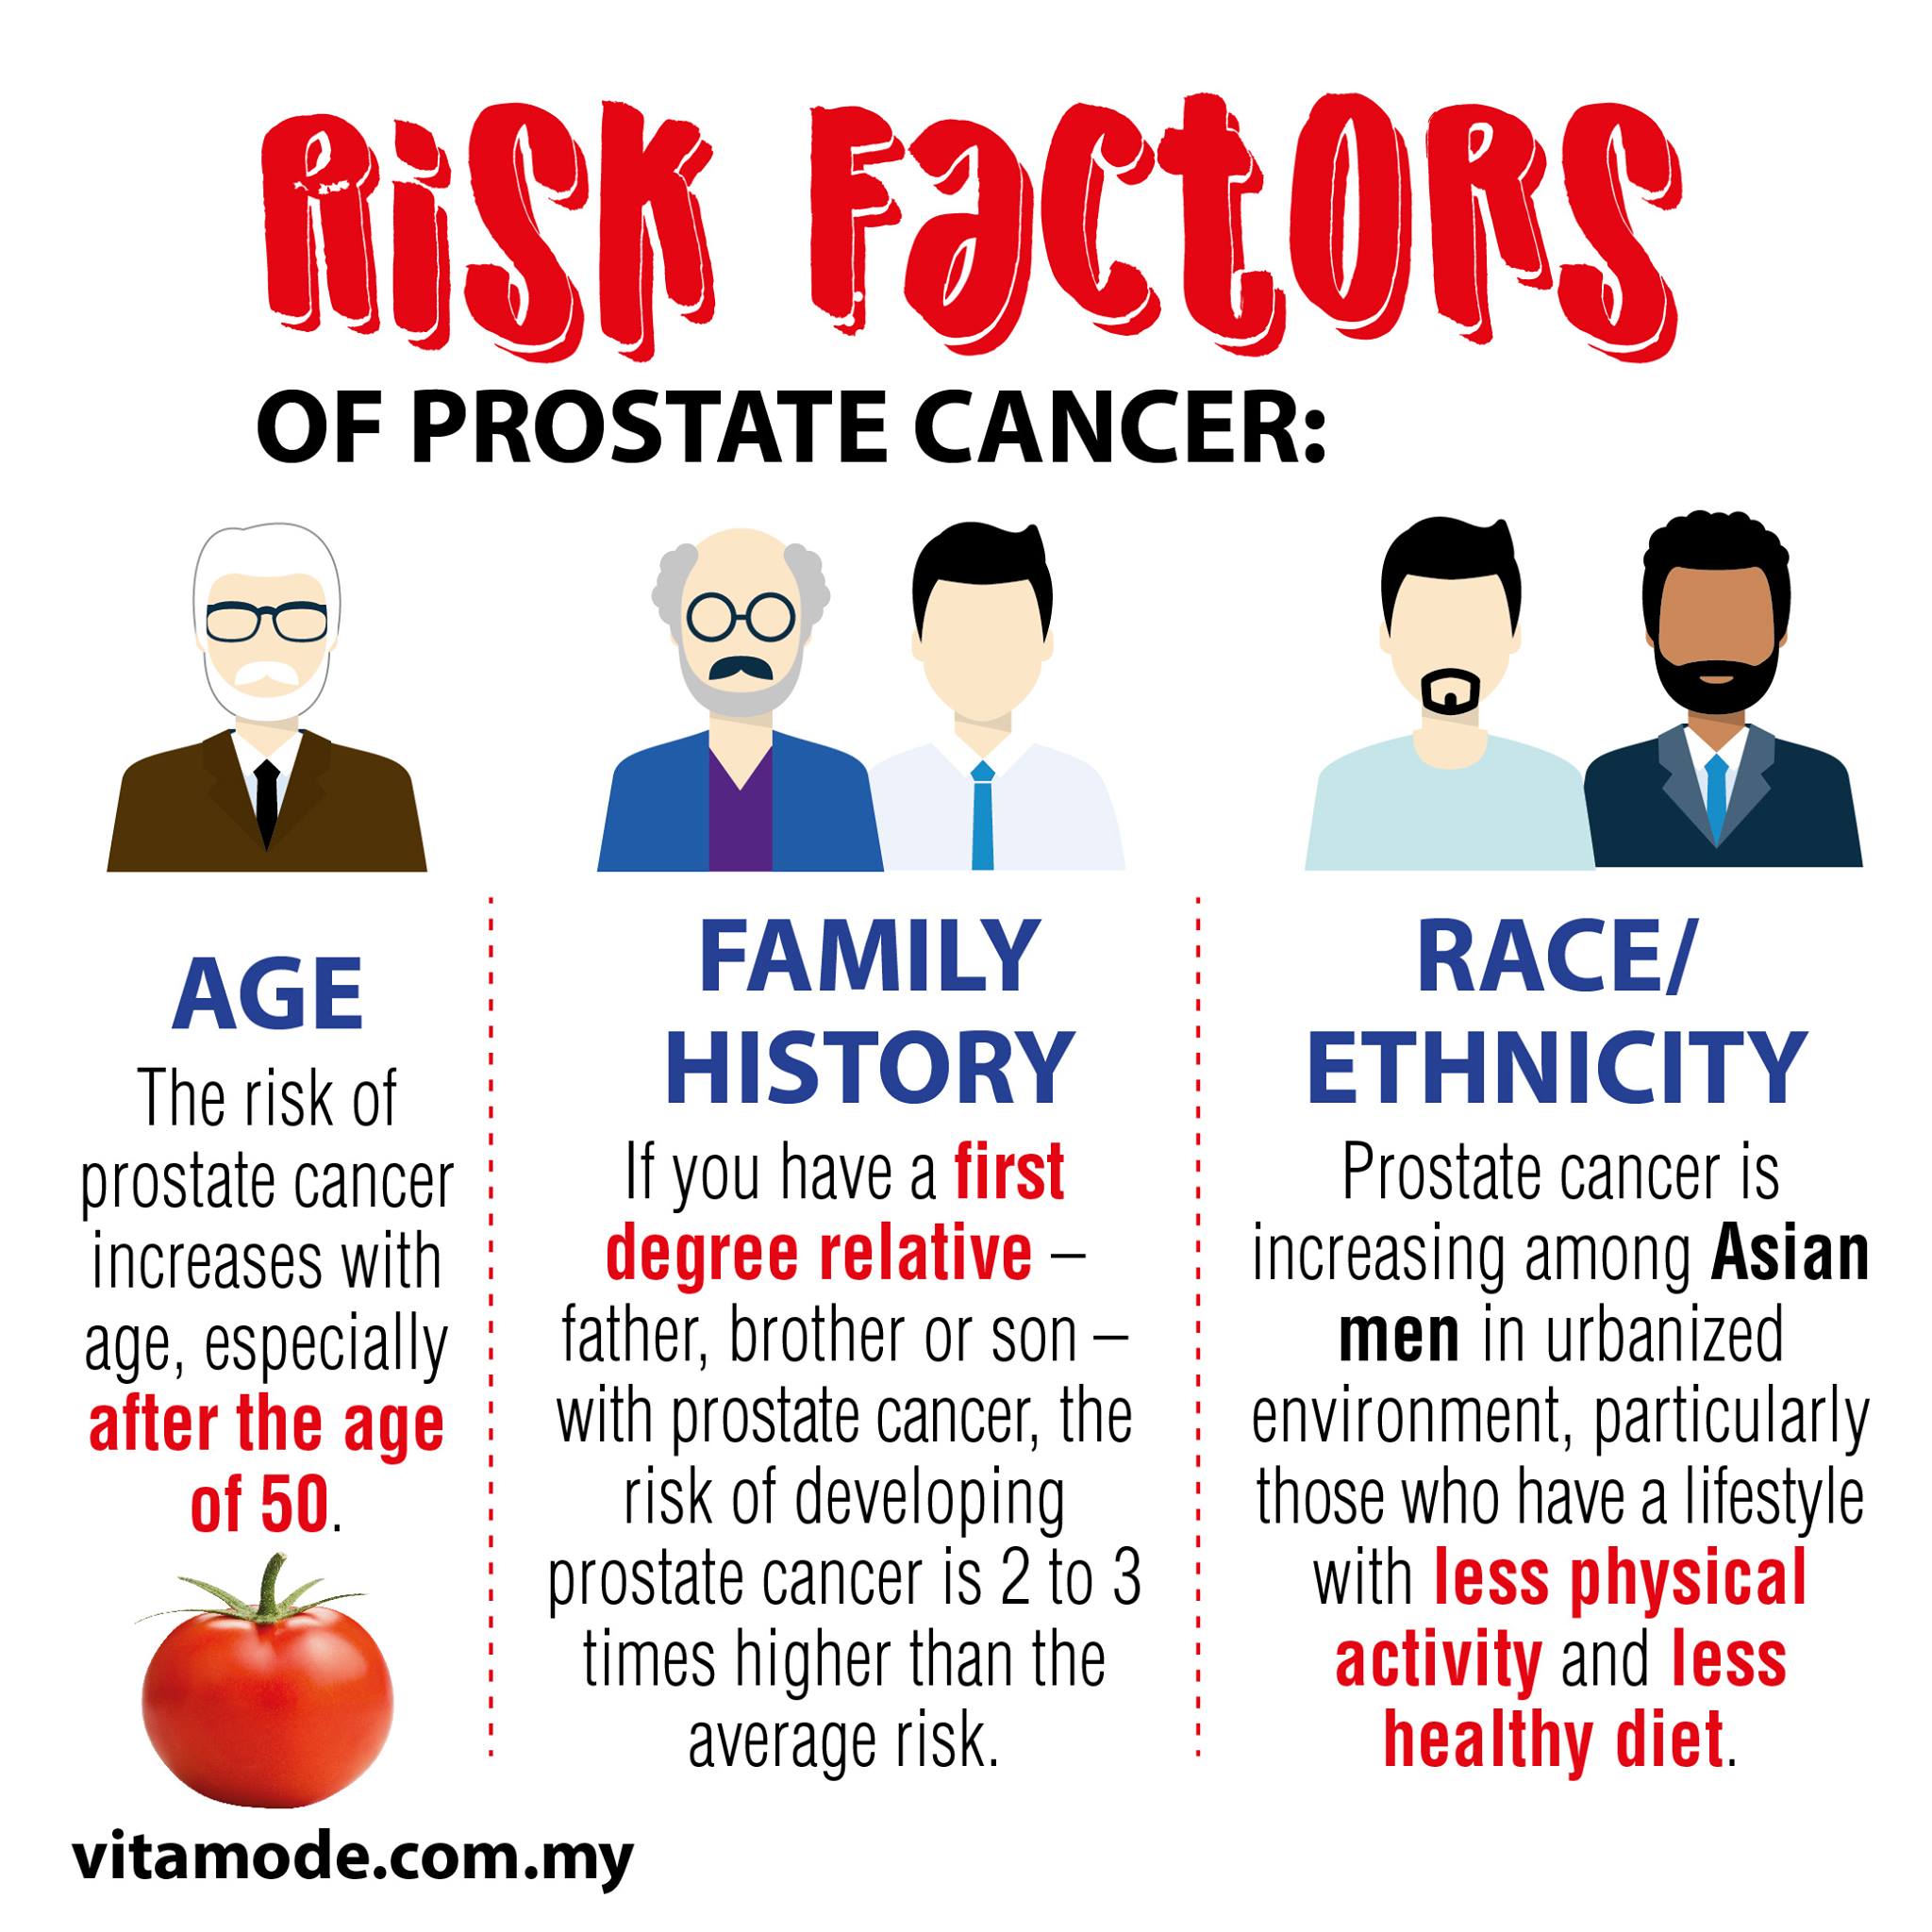 6 Things You Need To Know About Prostate Cancer